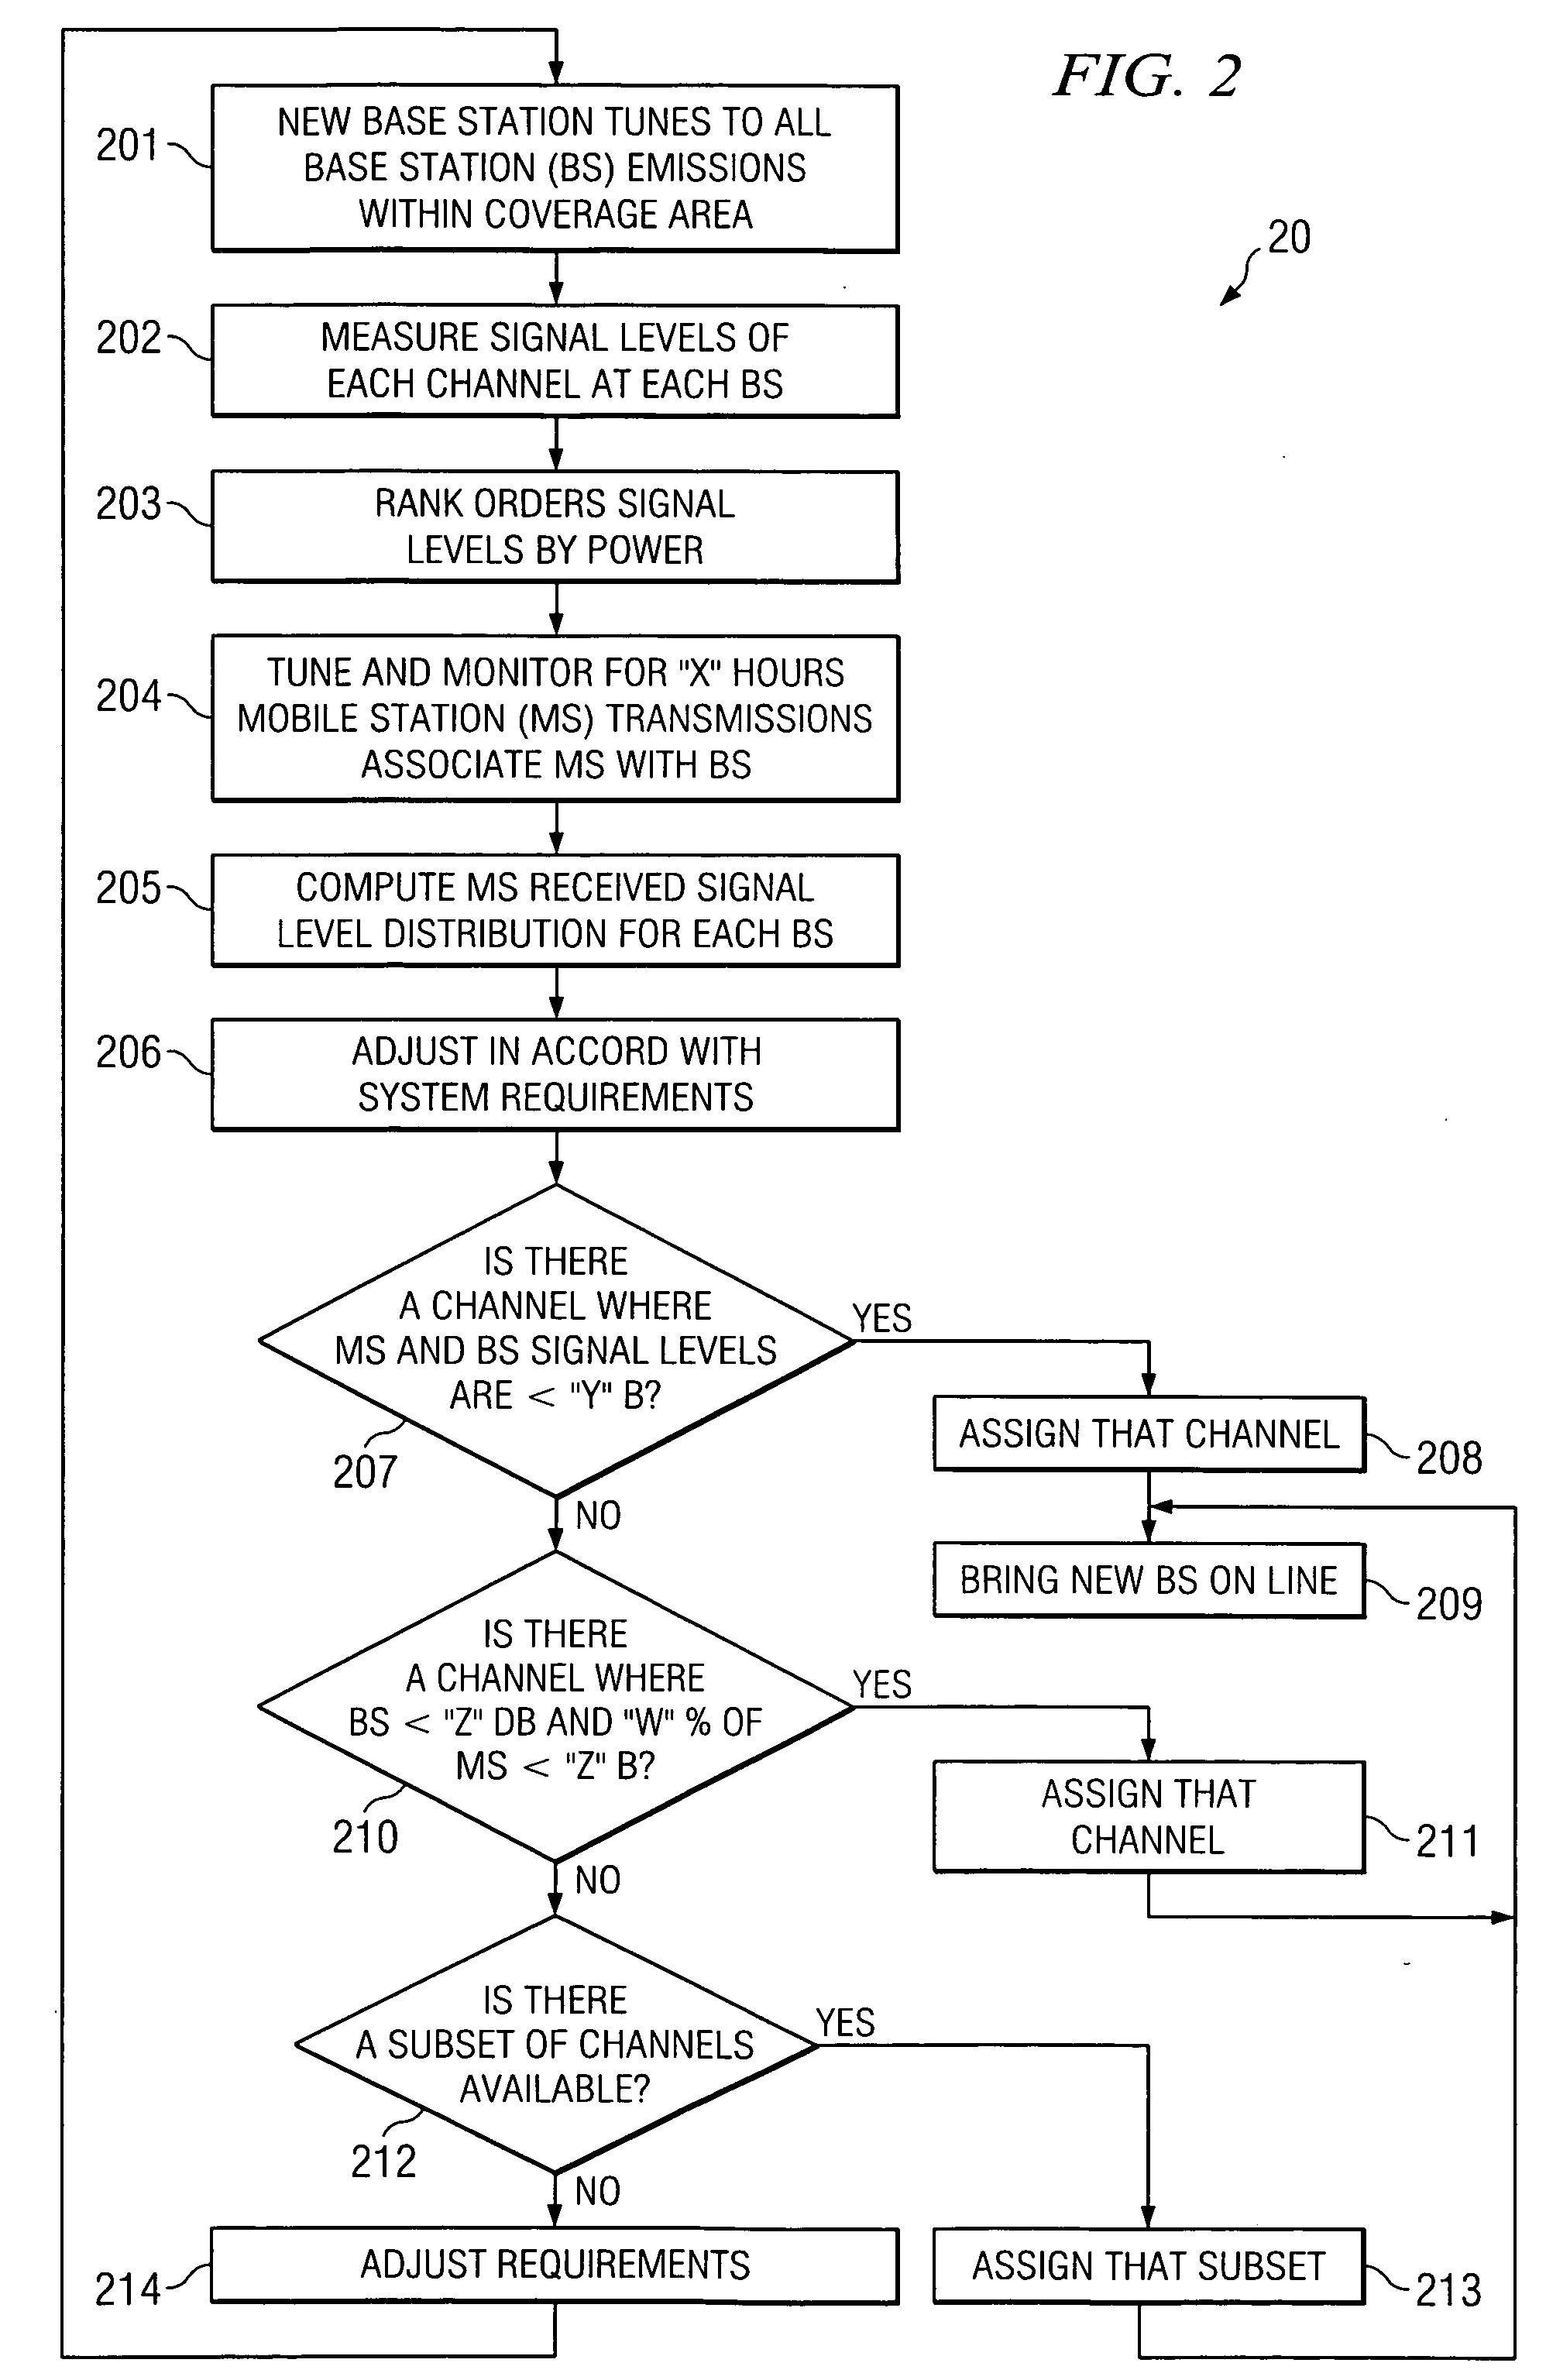 Systems and methods for coordinating the coverage and capacity of a wireless base station